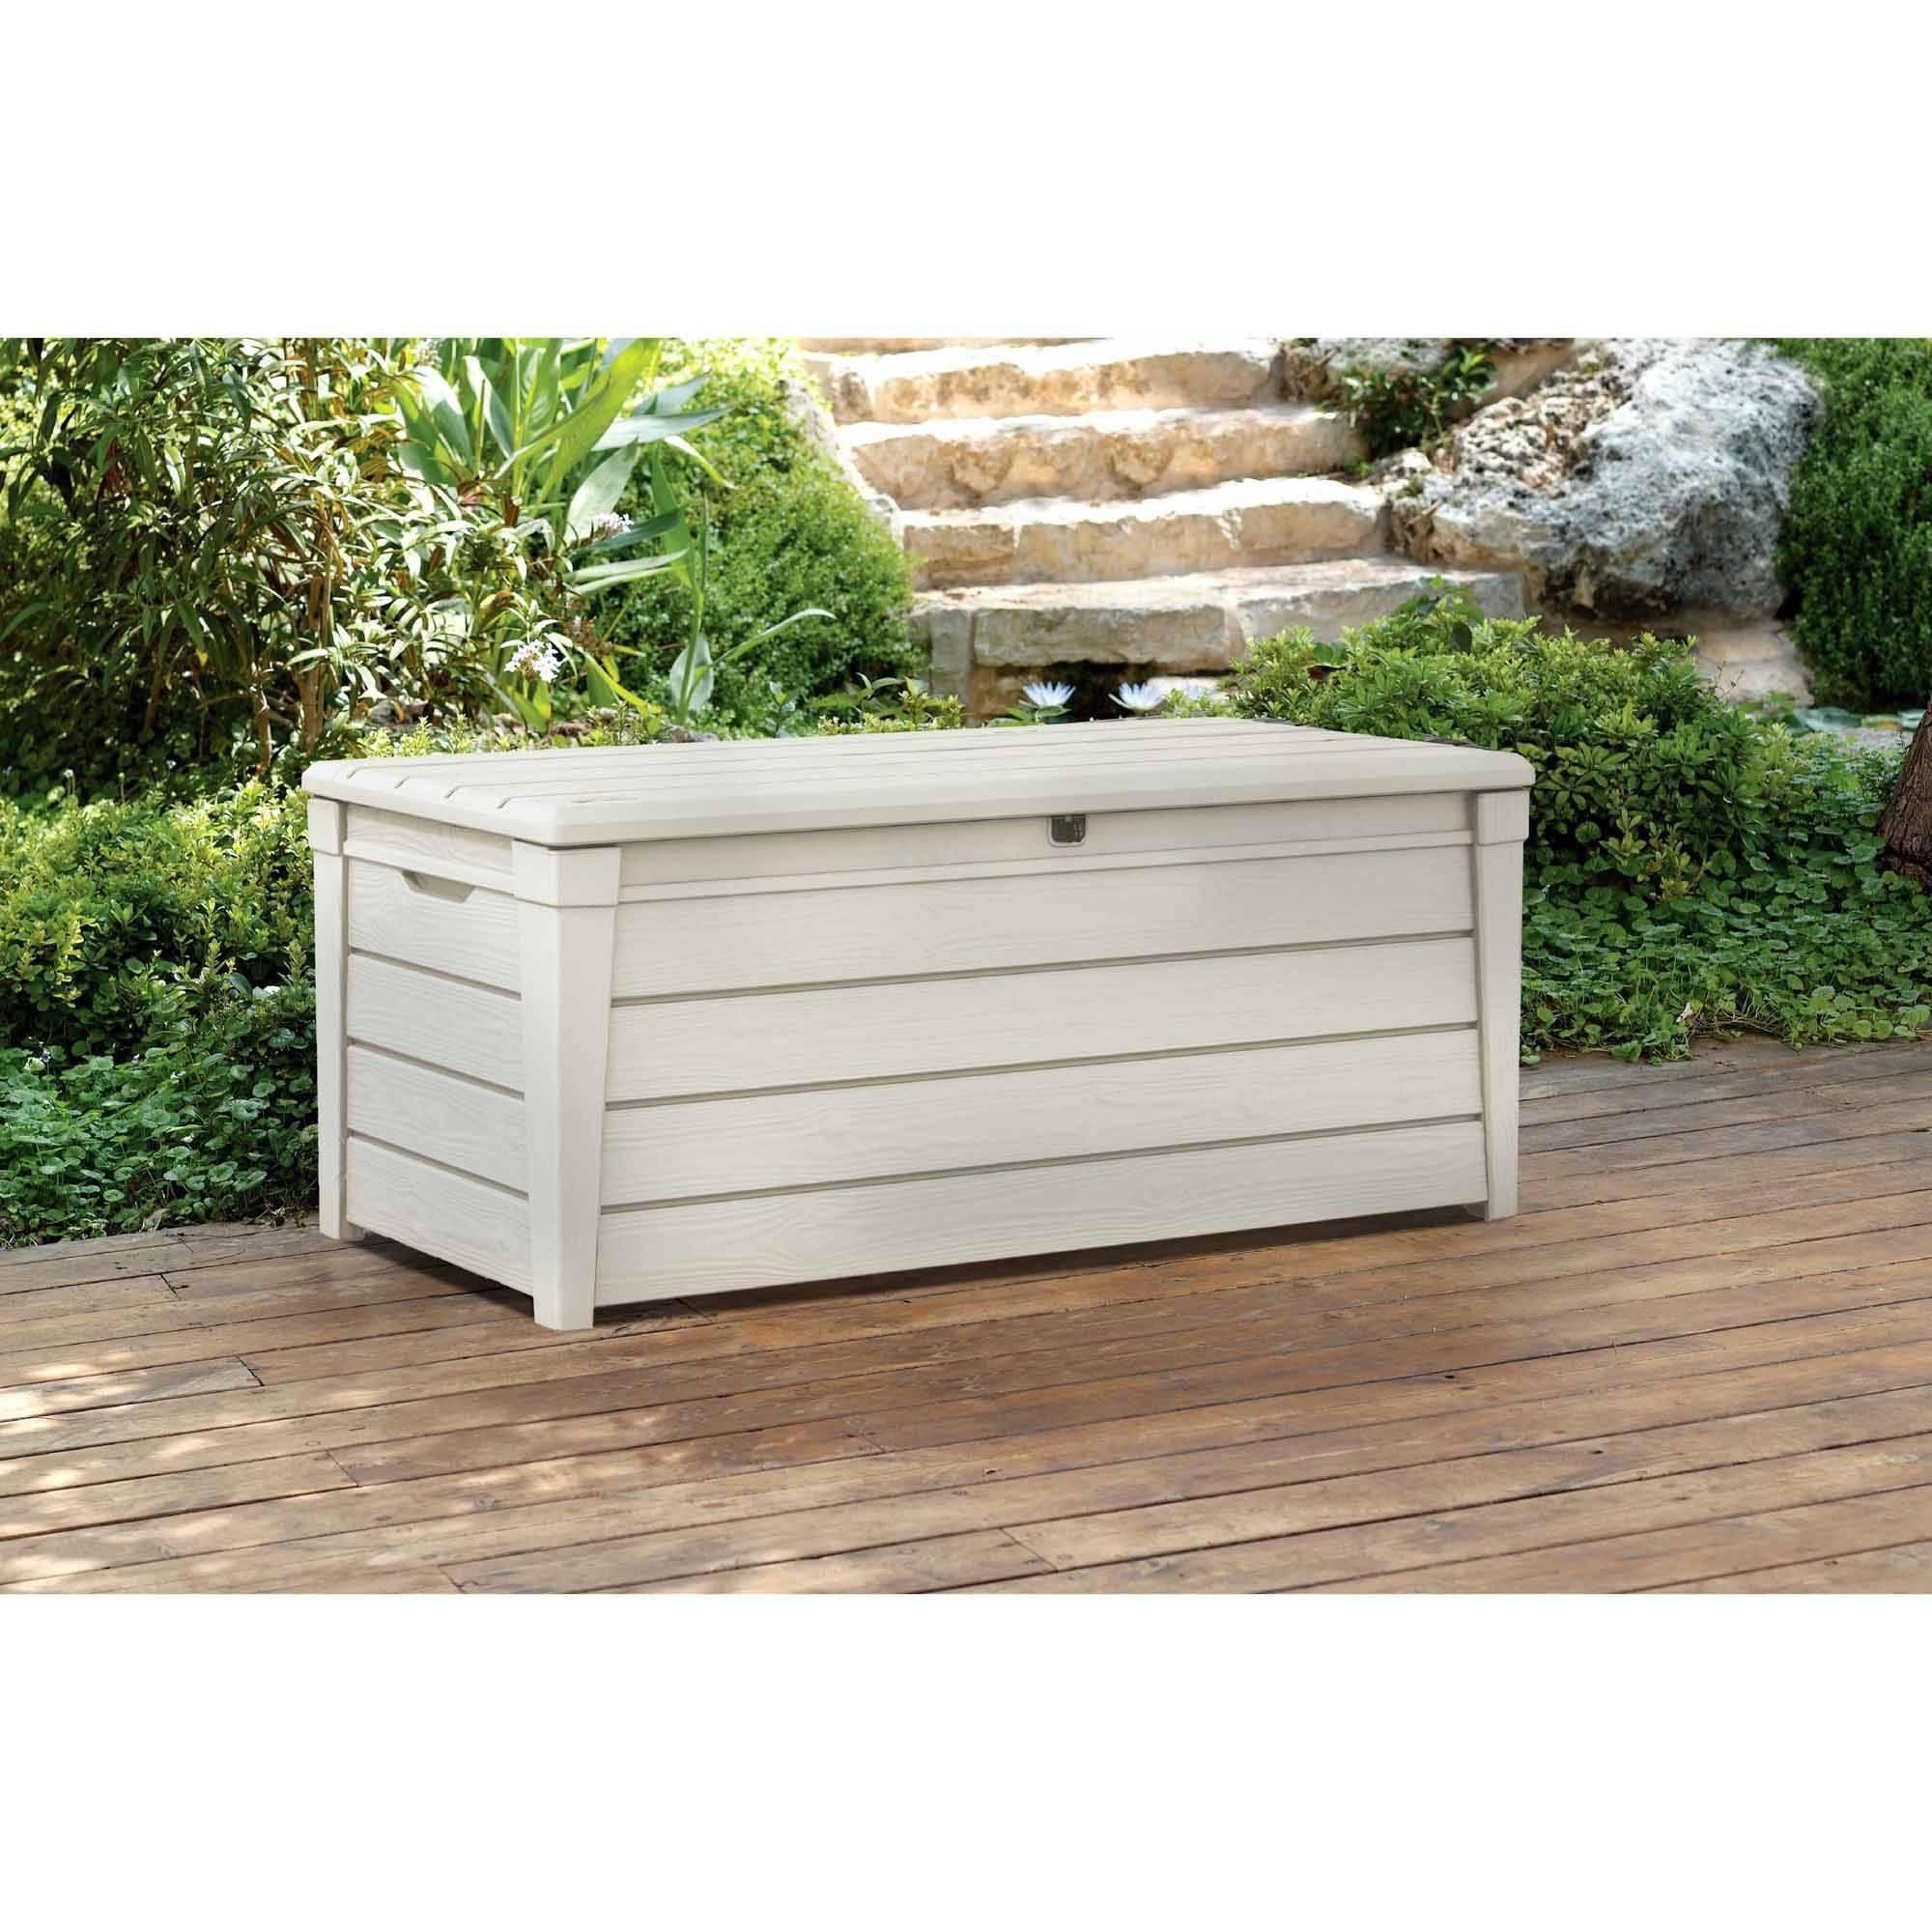 Keter Brightwood Outdoor Plastic Deck Storage Container Box 120 Gal throughout proportions 2000 X 2000